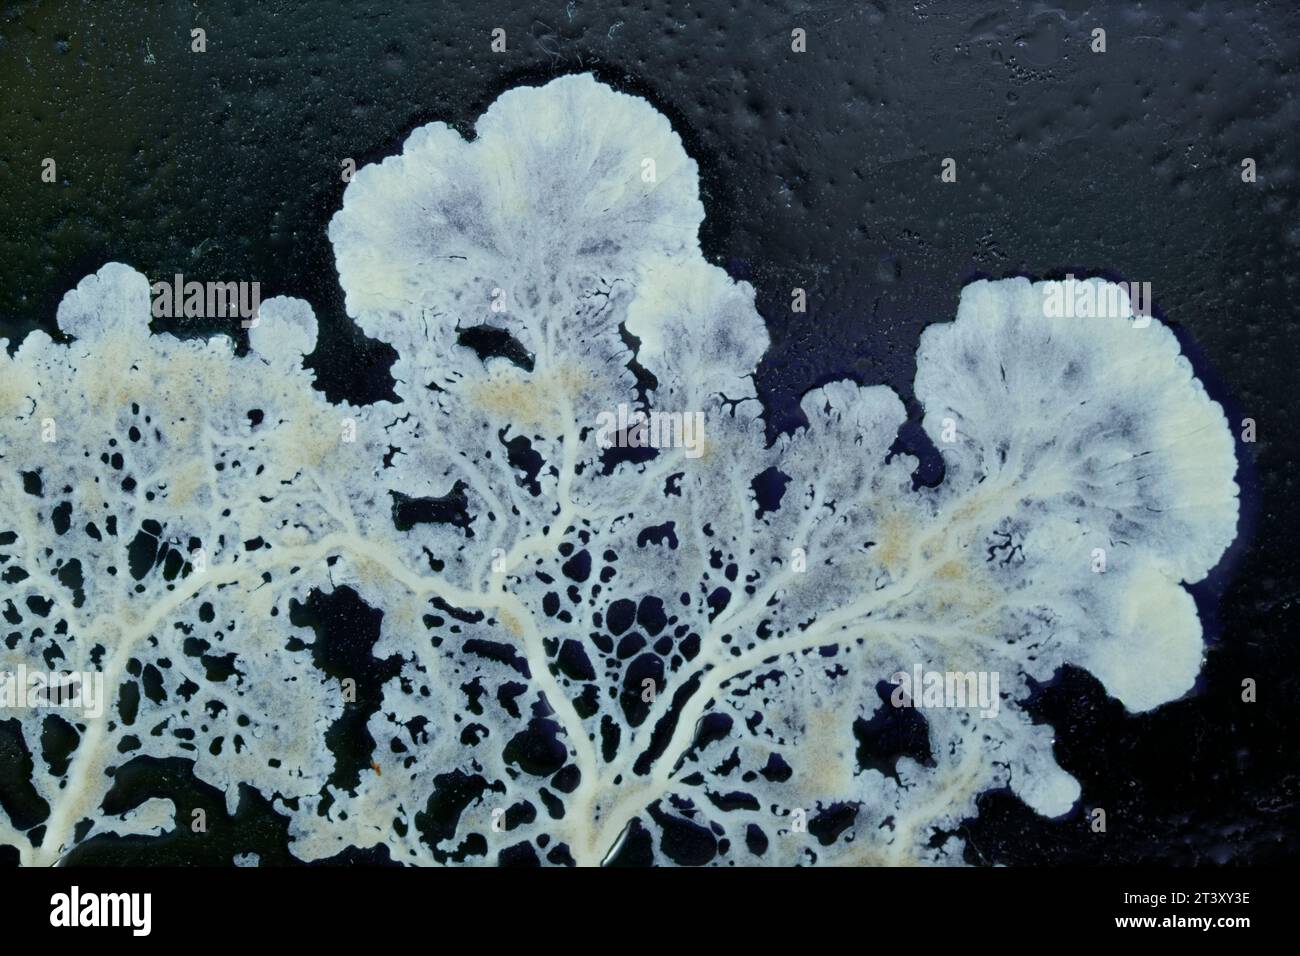 Plasmodial slime mold growing on a glass surface Stock Photo